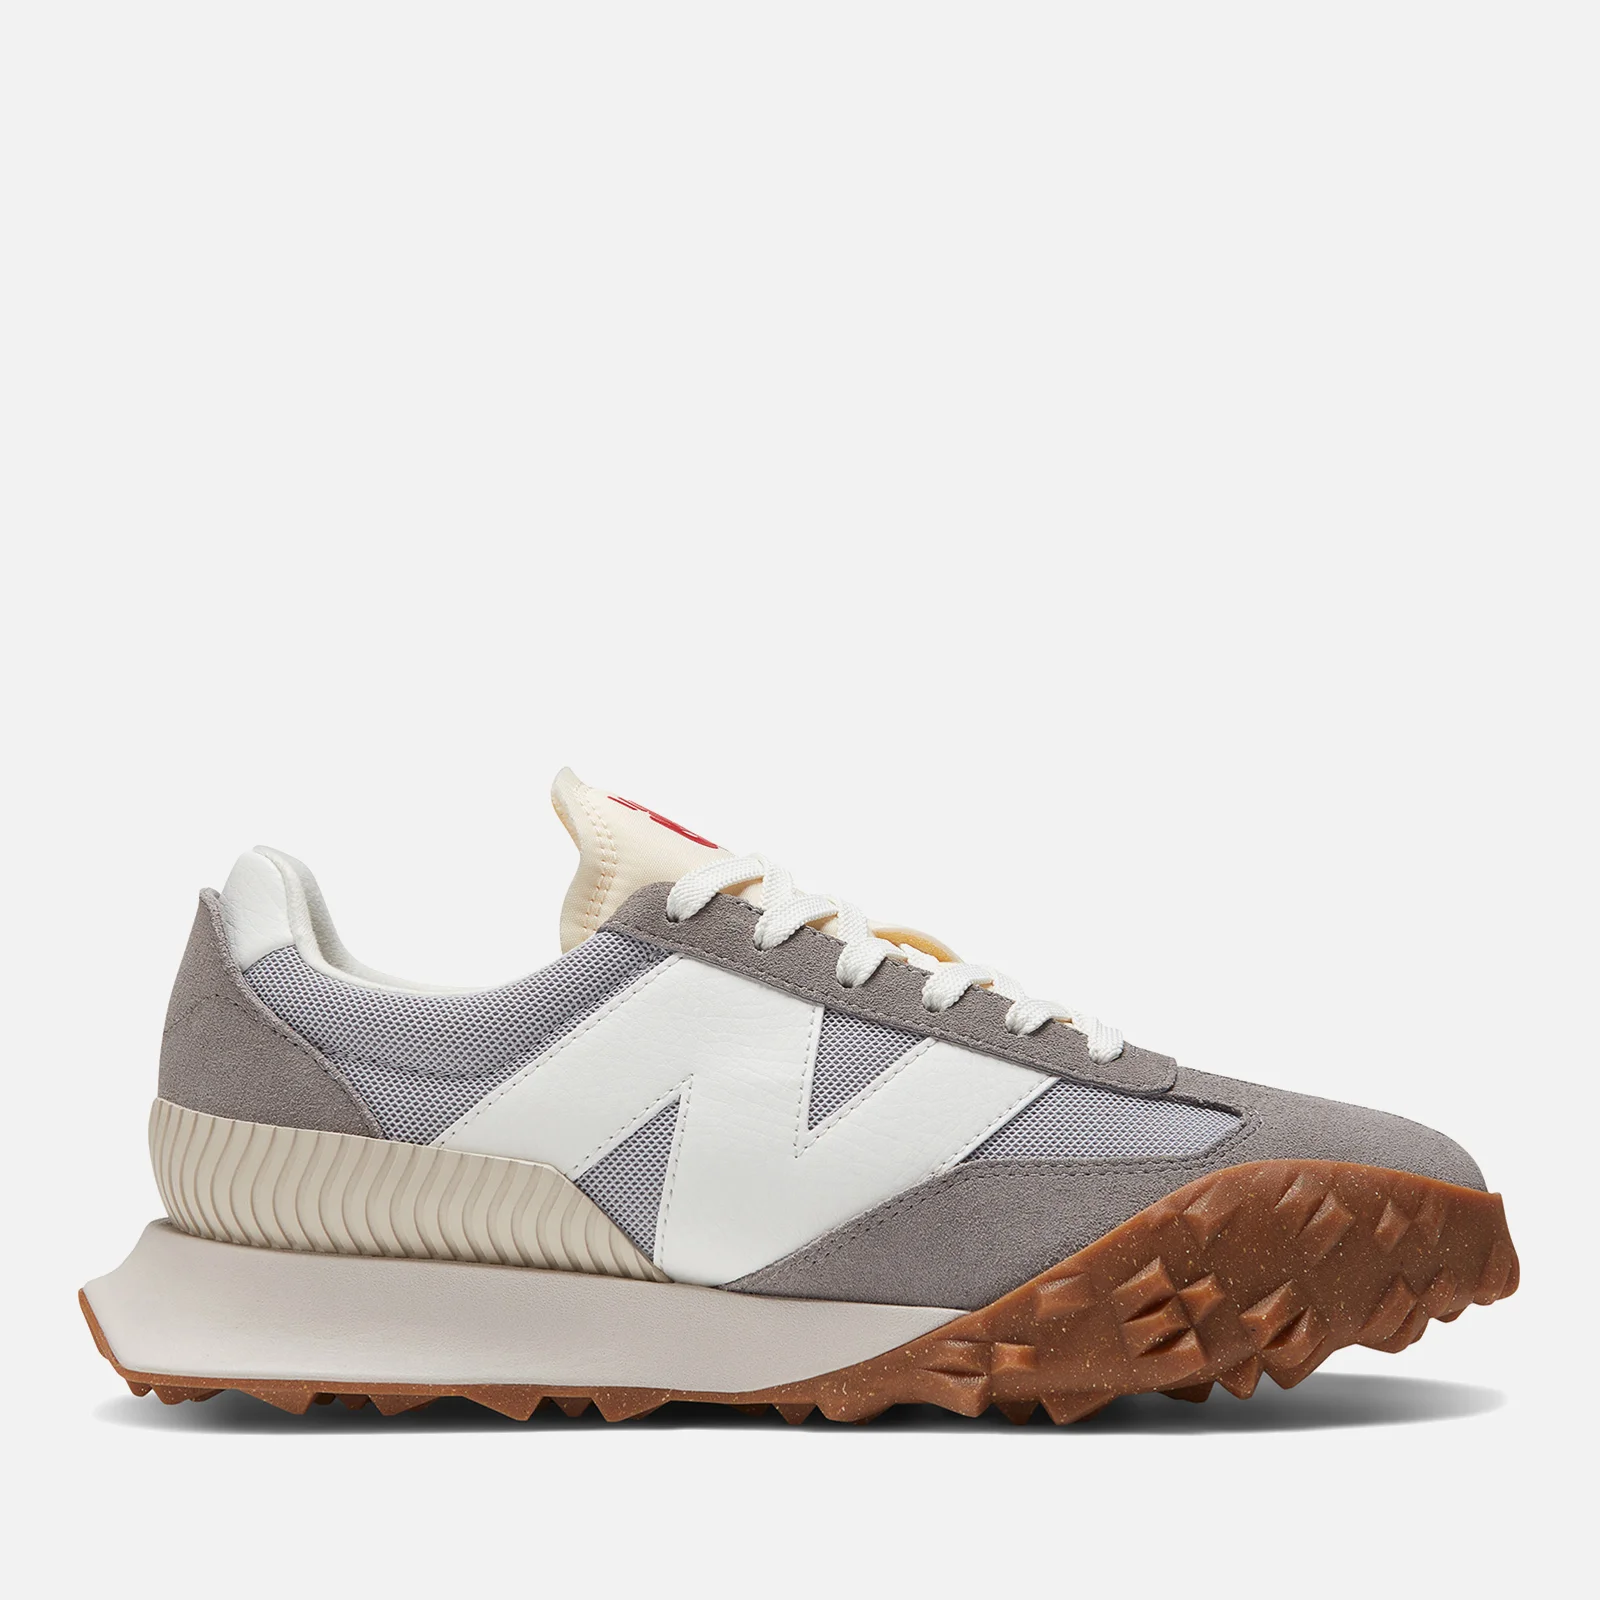 New Balance Xc72 Classic Suede and Mesh Trainers Image 1